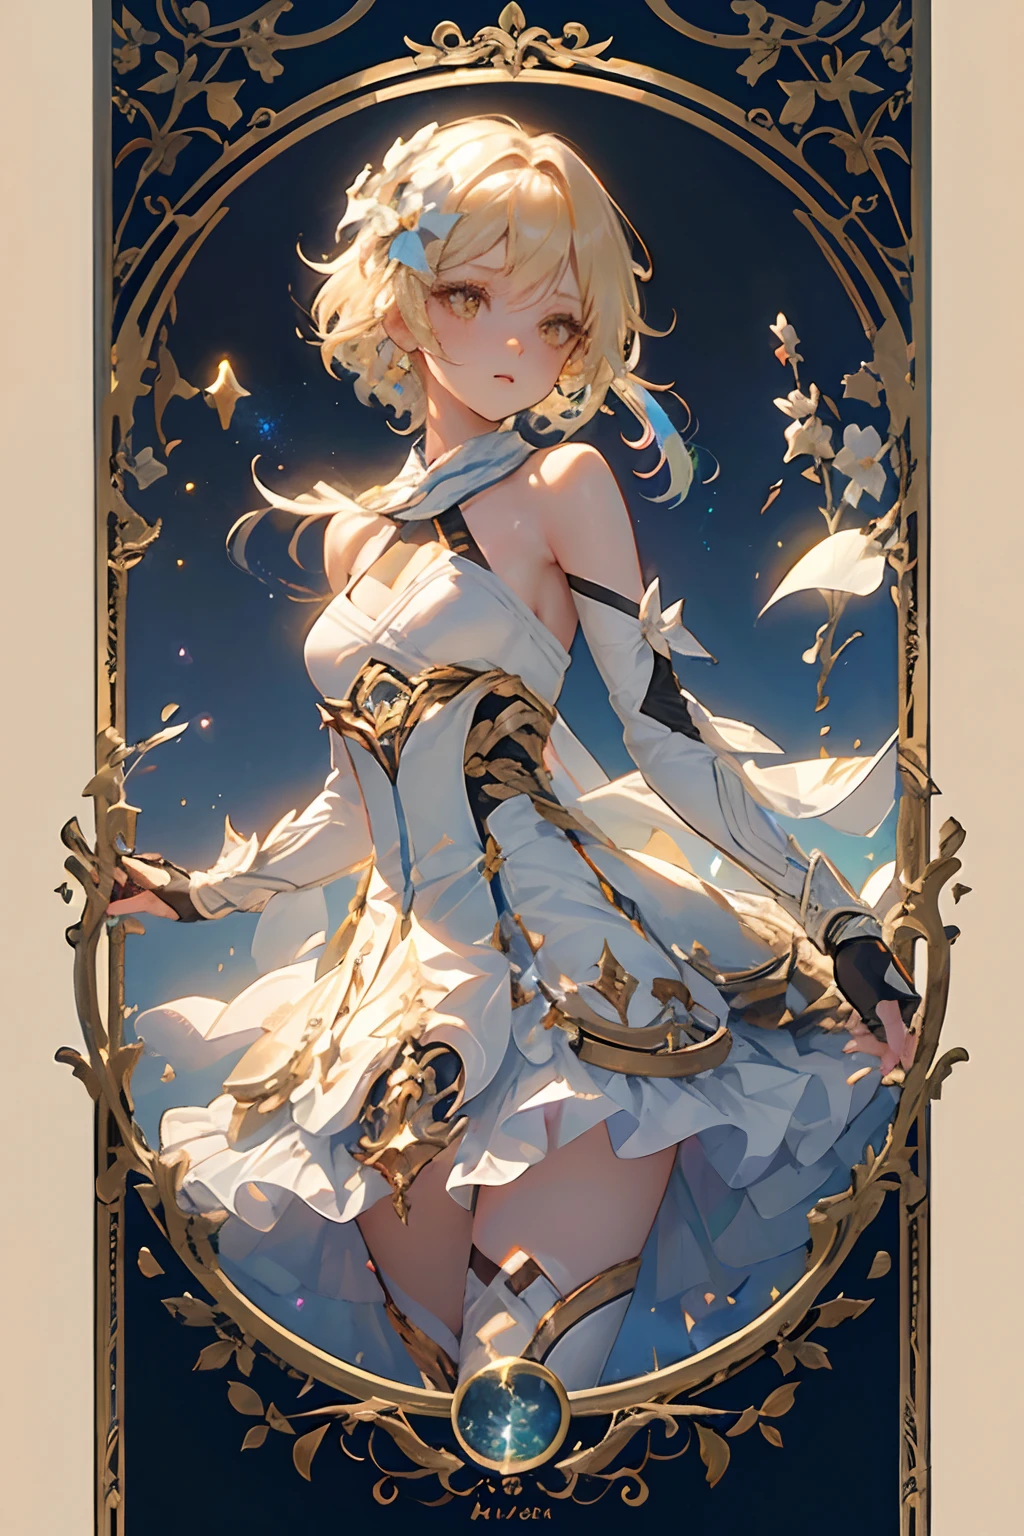 1 girl solo, short blond hair, white flower hair ornament, white dress, bare shoulders, detached sleeves, long white stockings, fingerless gloves, iridescent light, glowing rainbow crystals, sparkles, stars, floating in space, dark background with stars and galaxies, golden frame